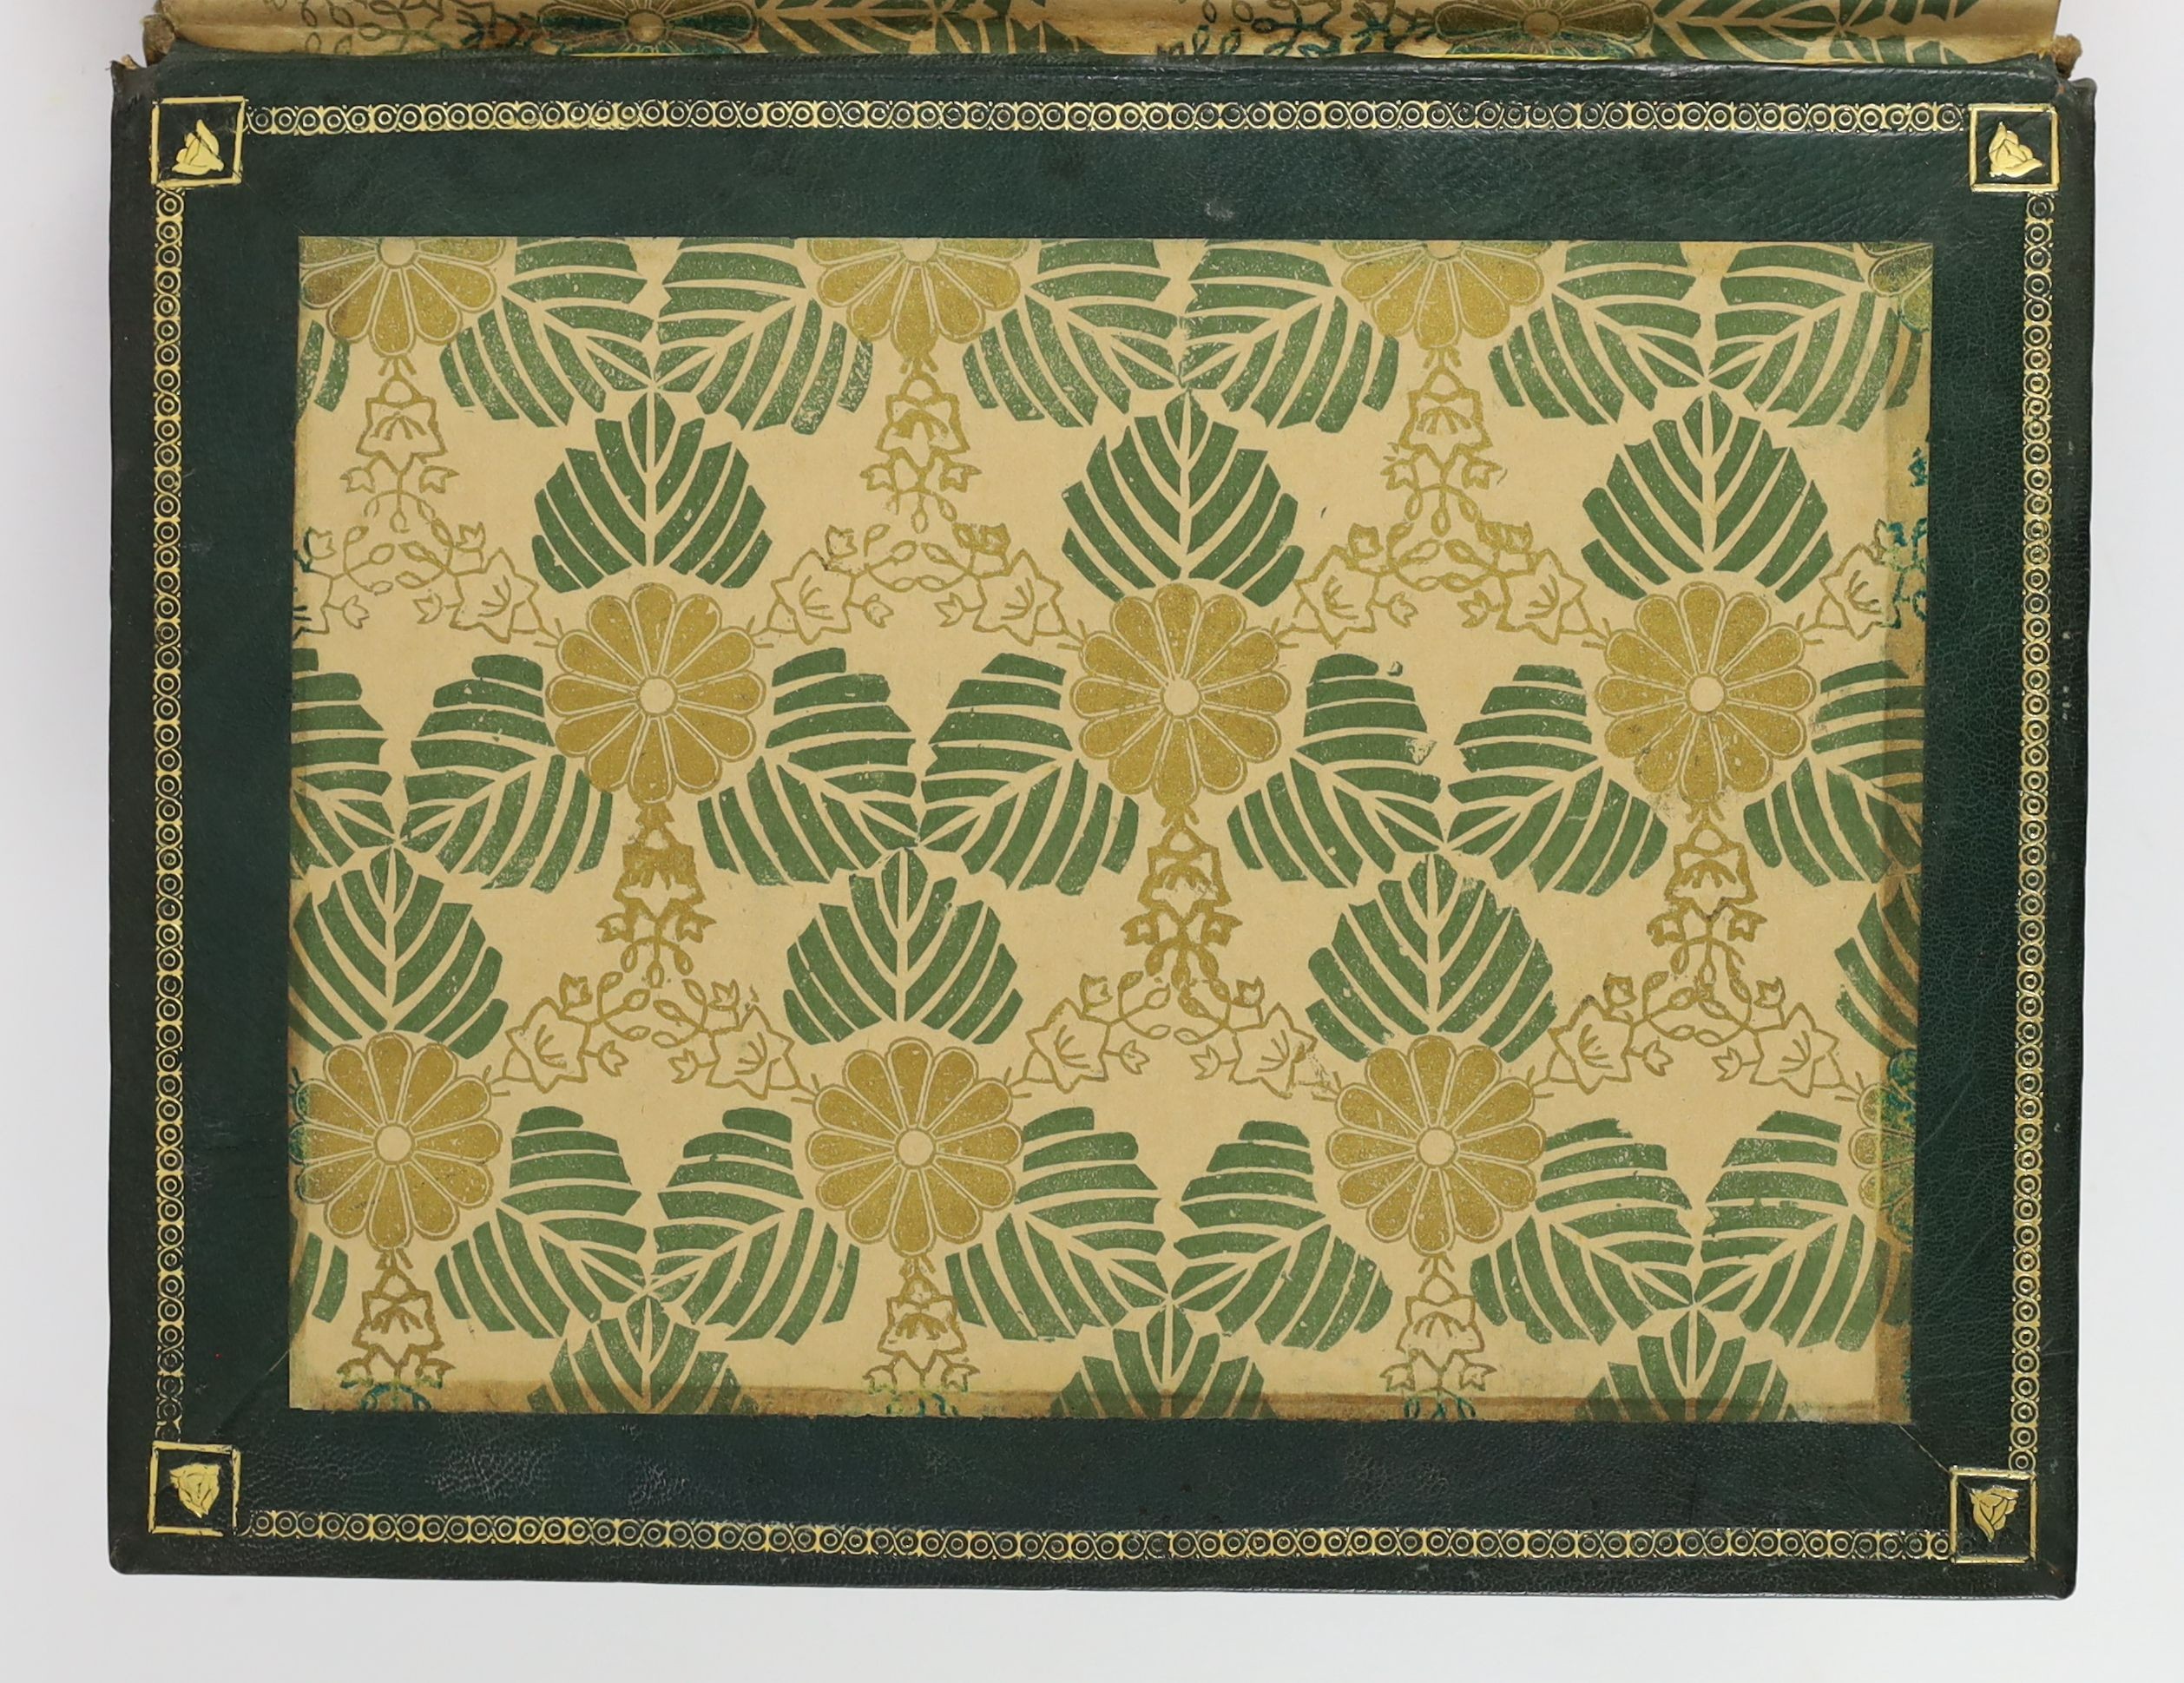 Englefield, Henry Charles, Sir - A Walk Through Southampton, 4to, rebound green morocco gilt, with 5 plates (of 6), 3 hand tinted including additional title page, which has an ink presentation inscription, T. Baker, Sout